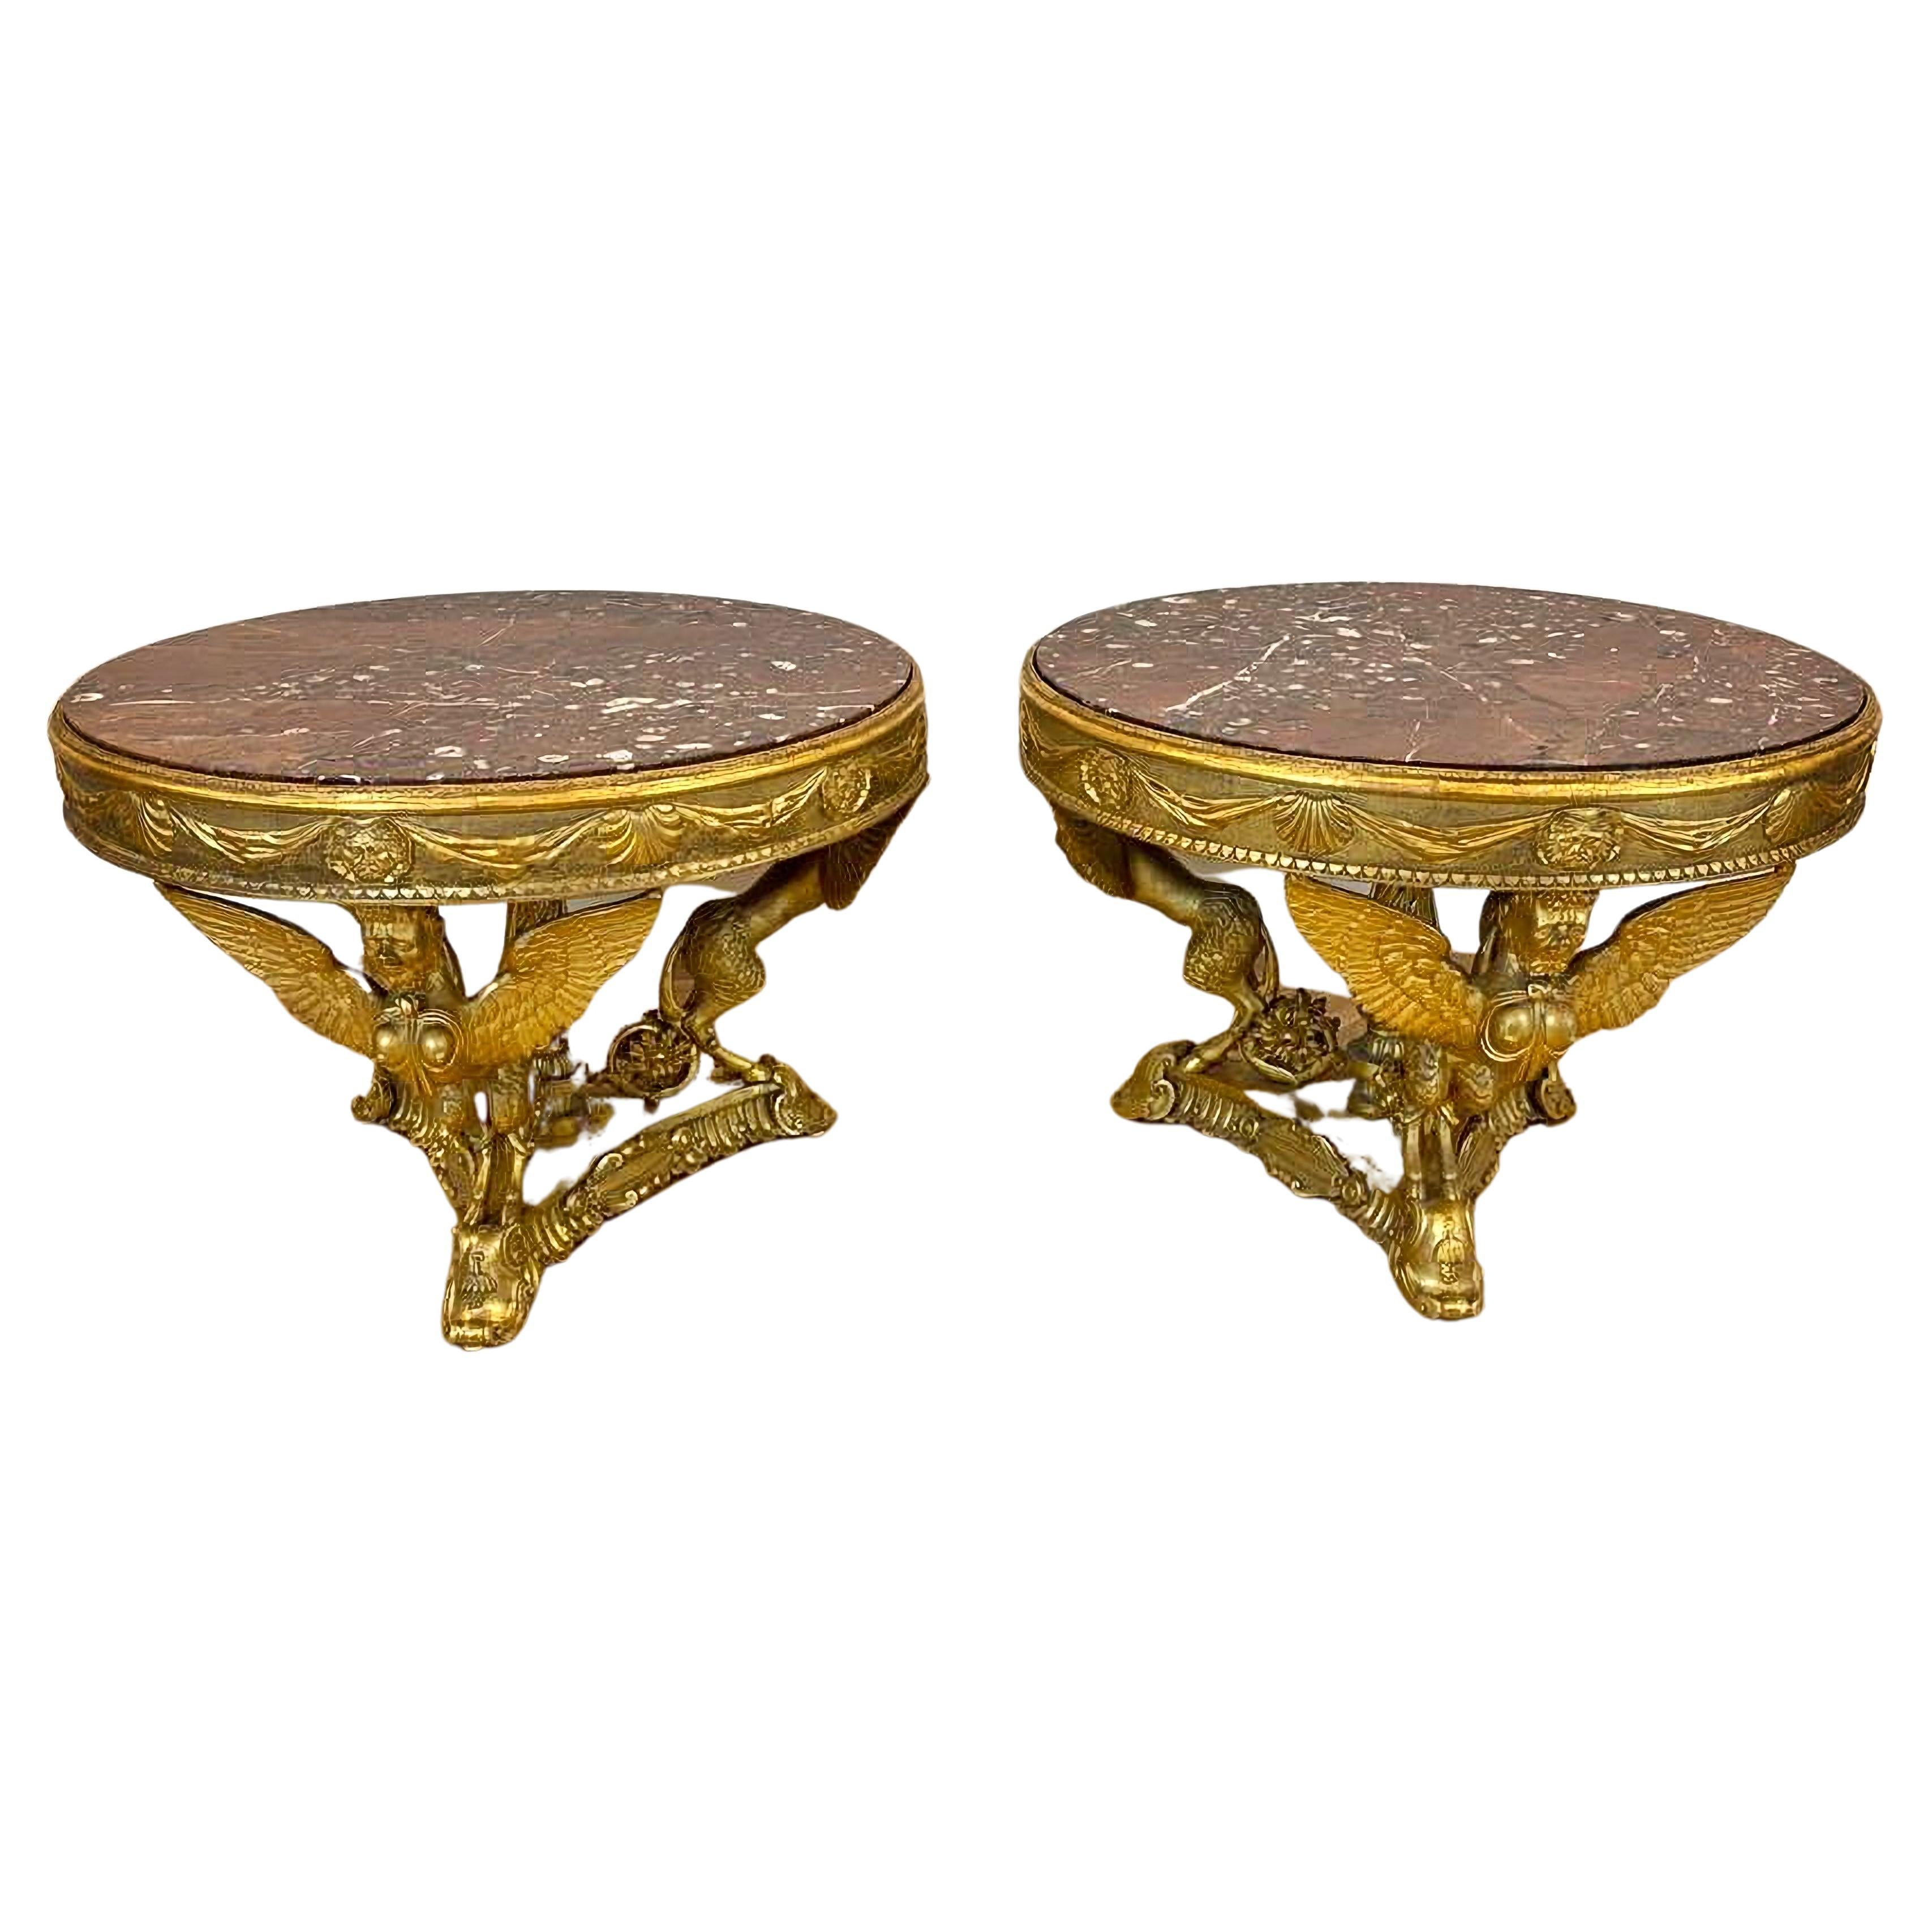 Impressive Pair of Tables First Empire Napoleon III Early 19th Century For Sale